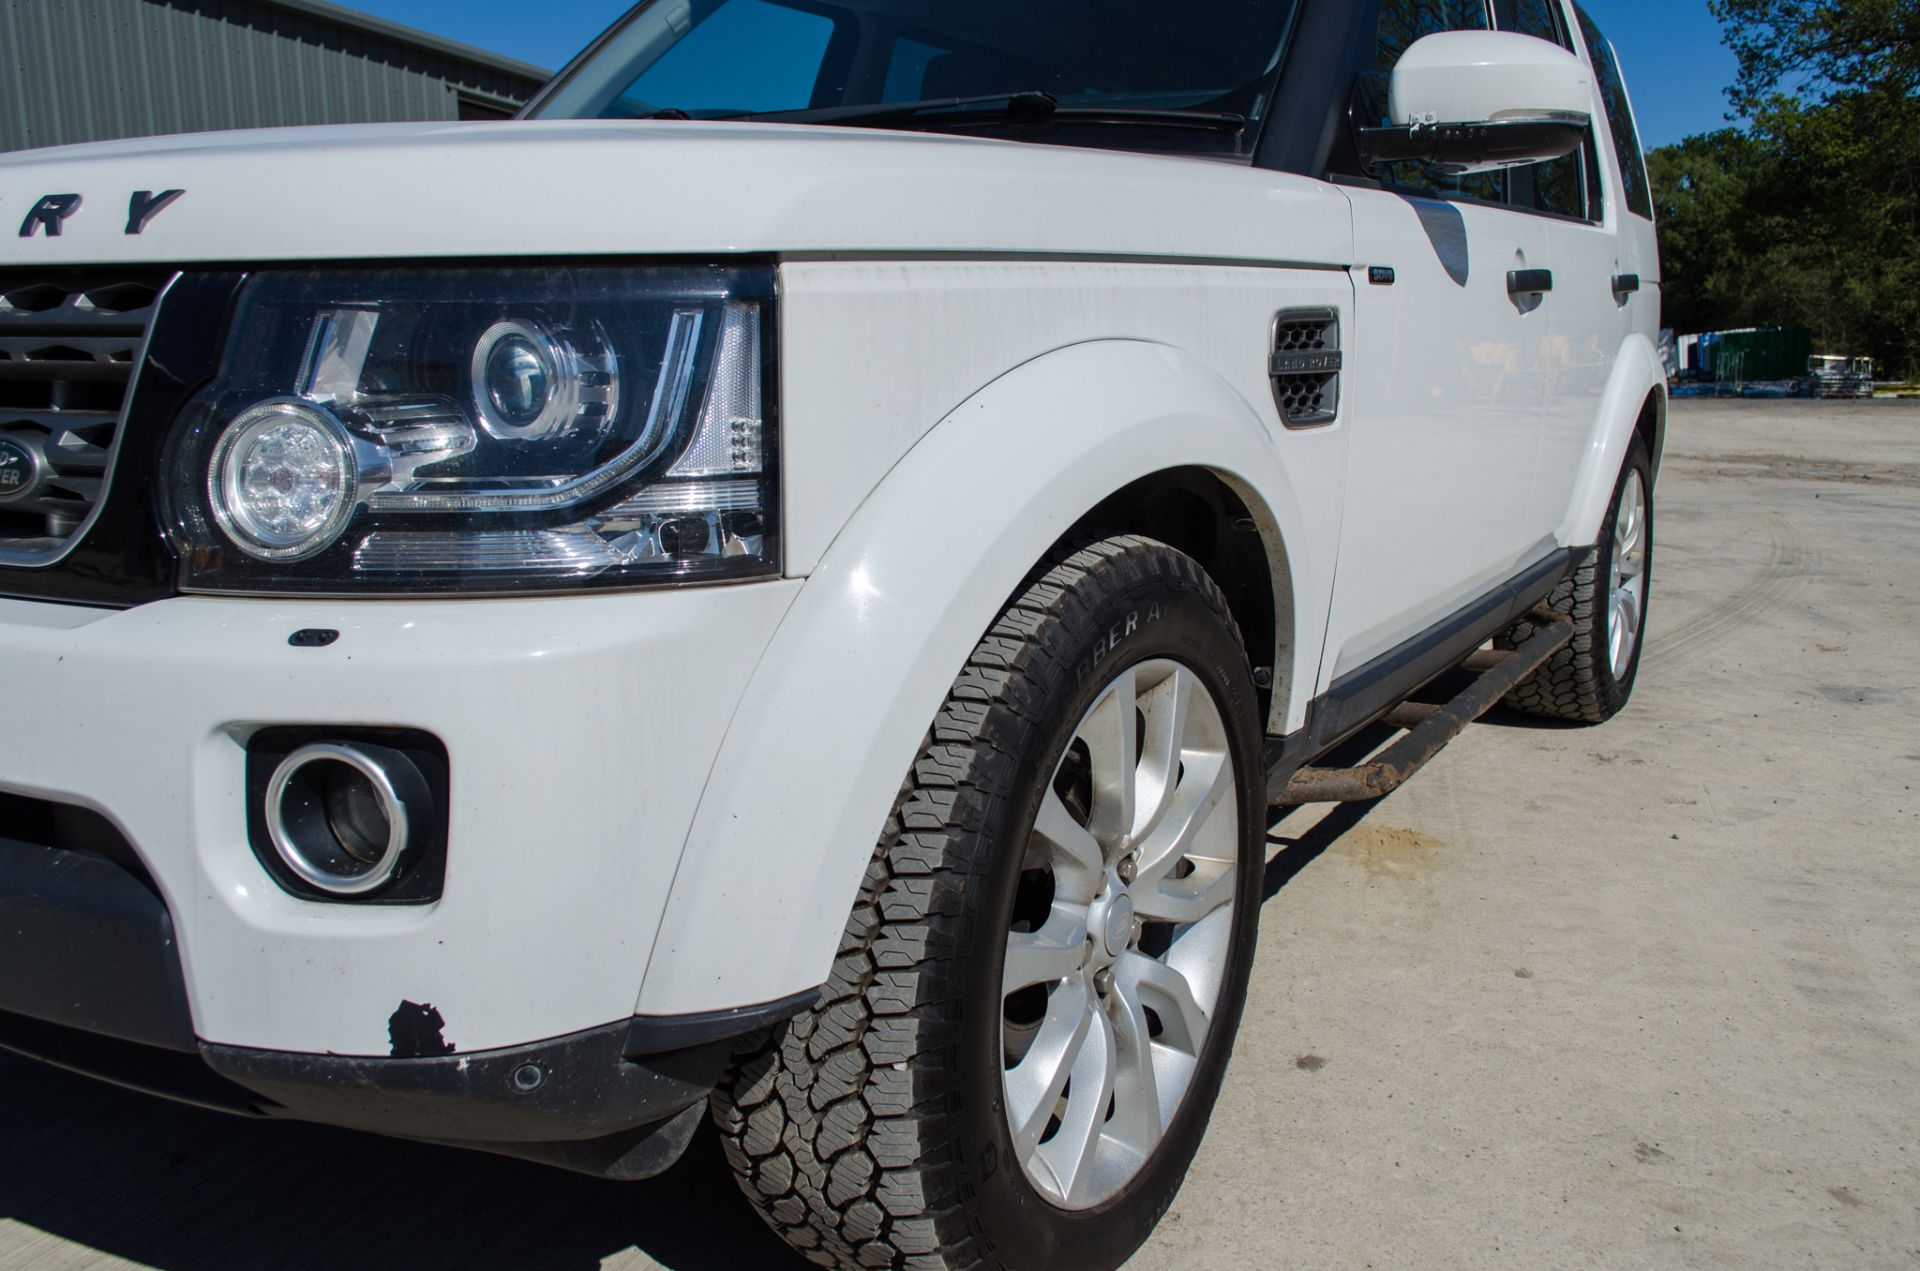 Land Rover Discovery 4 3.0 SE SDV6 Commercial 4x4 utility vehicle Reg No: PL65 SVR Date of - Image 9 of 32